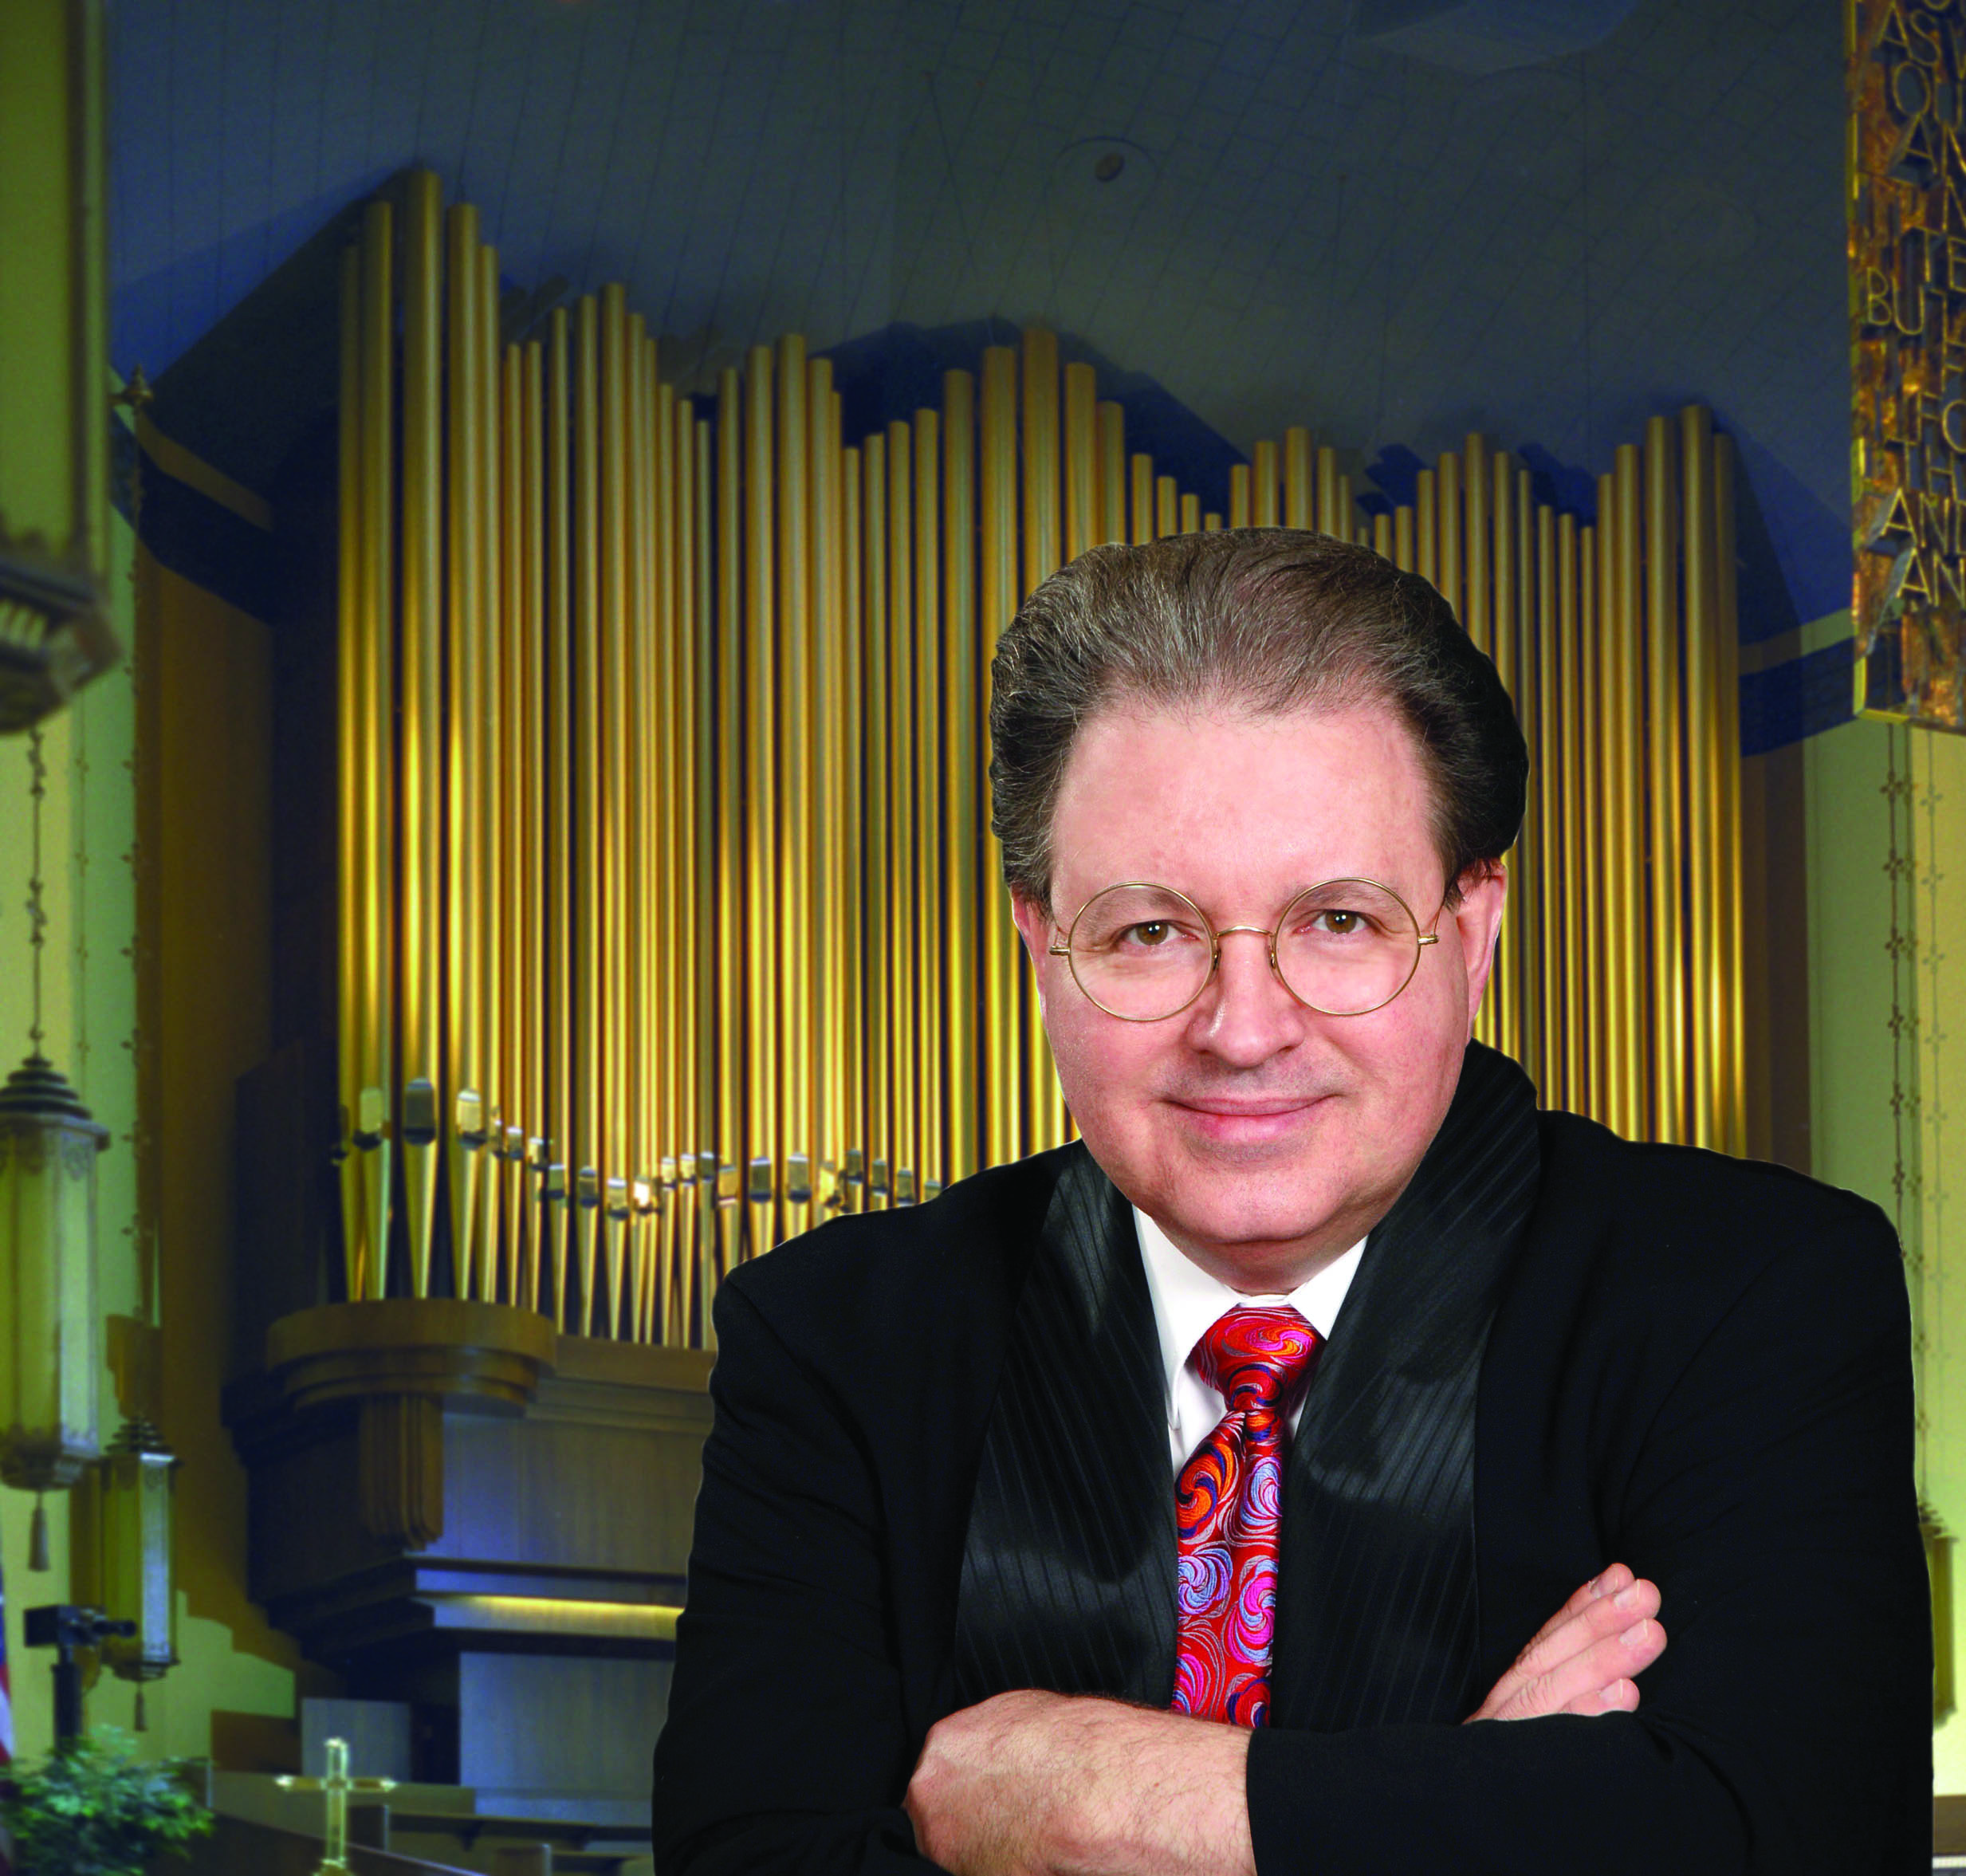 Popularly and critically acclaimed organist Frederick Hohman, D.M.A., will perform a recital on Sunday, March 5, at 3 p.m. in The University of Scranton’s Houlihan McLean Center. Admission is free, and the concert is open to the public.